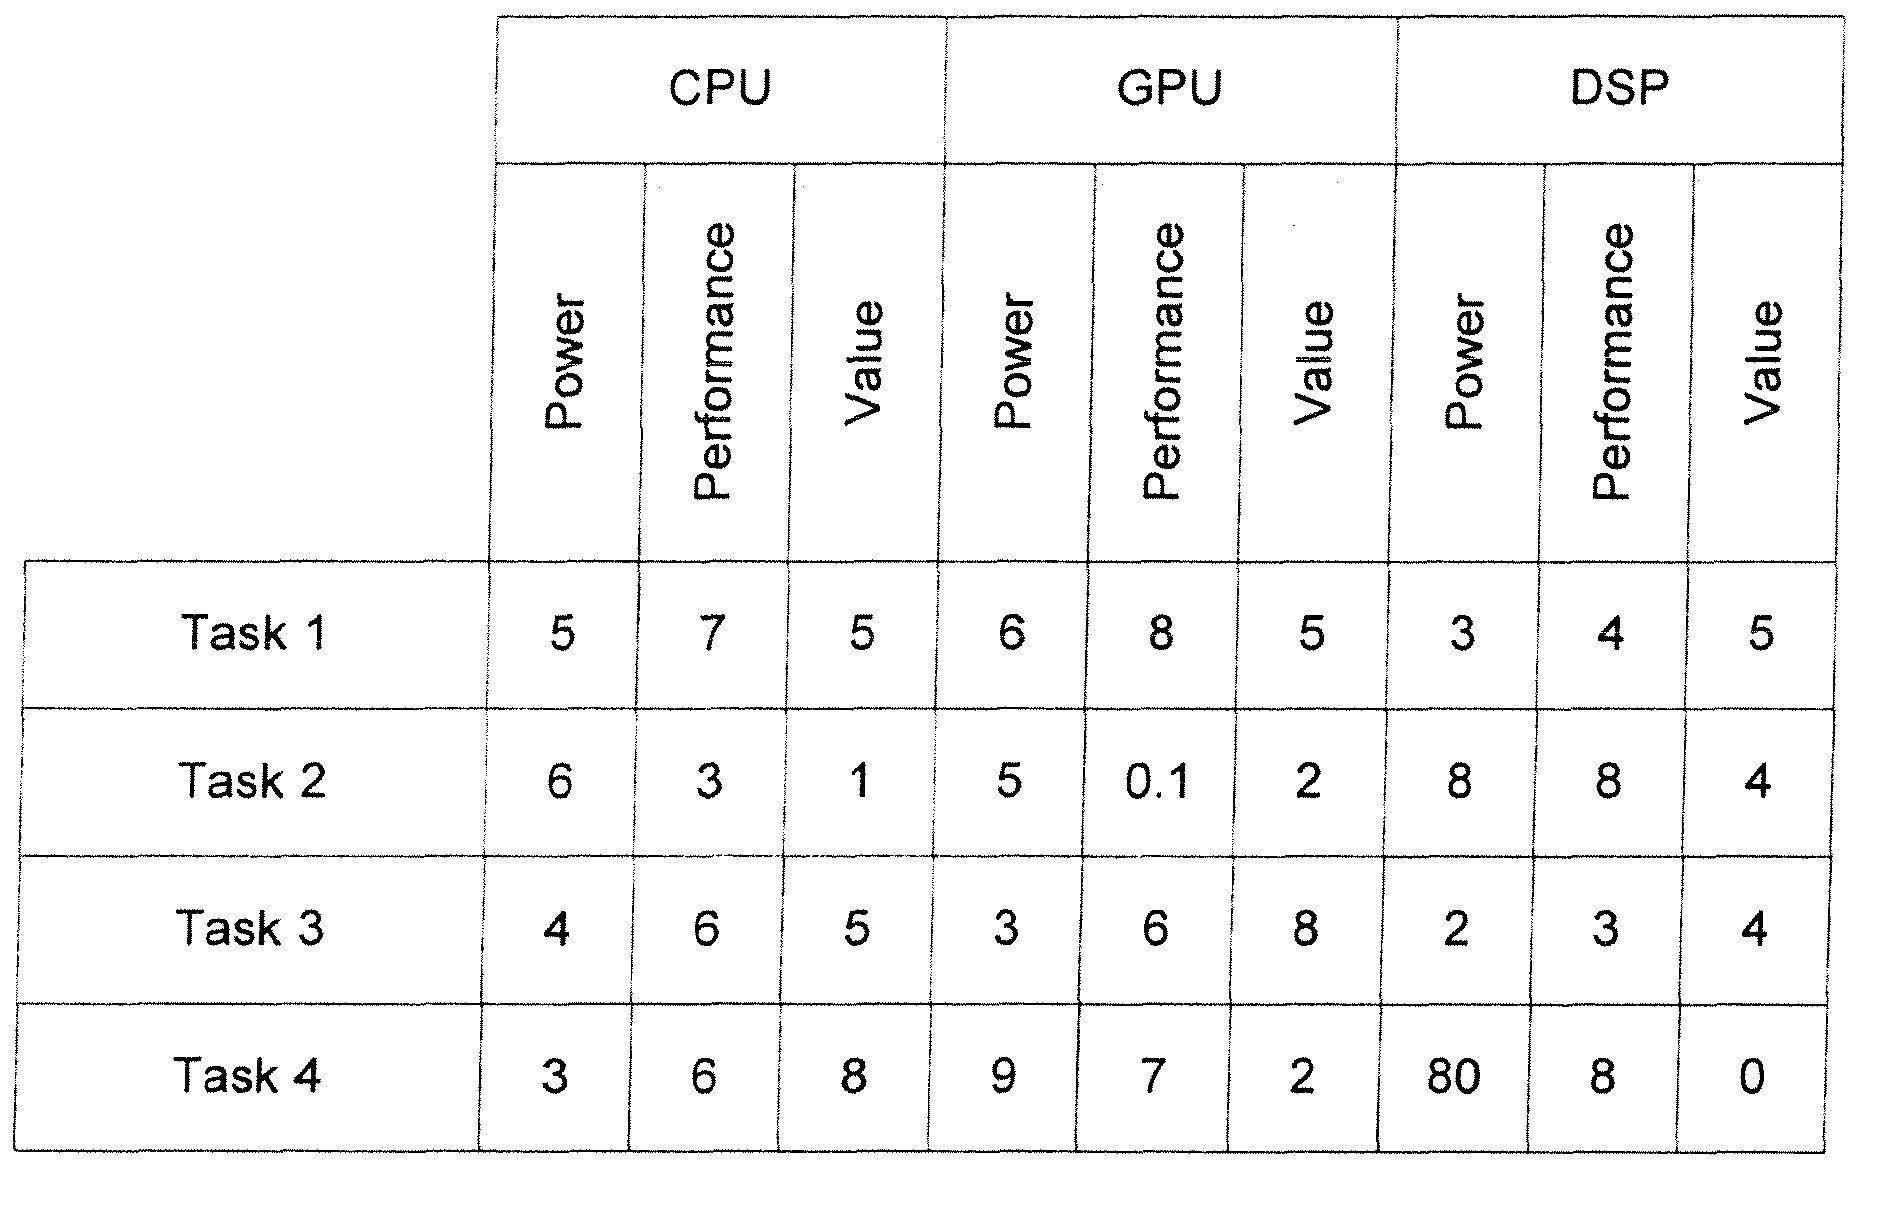 Methods and apparatuses for load balancing between multiple processing units